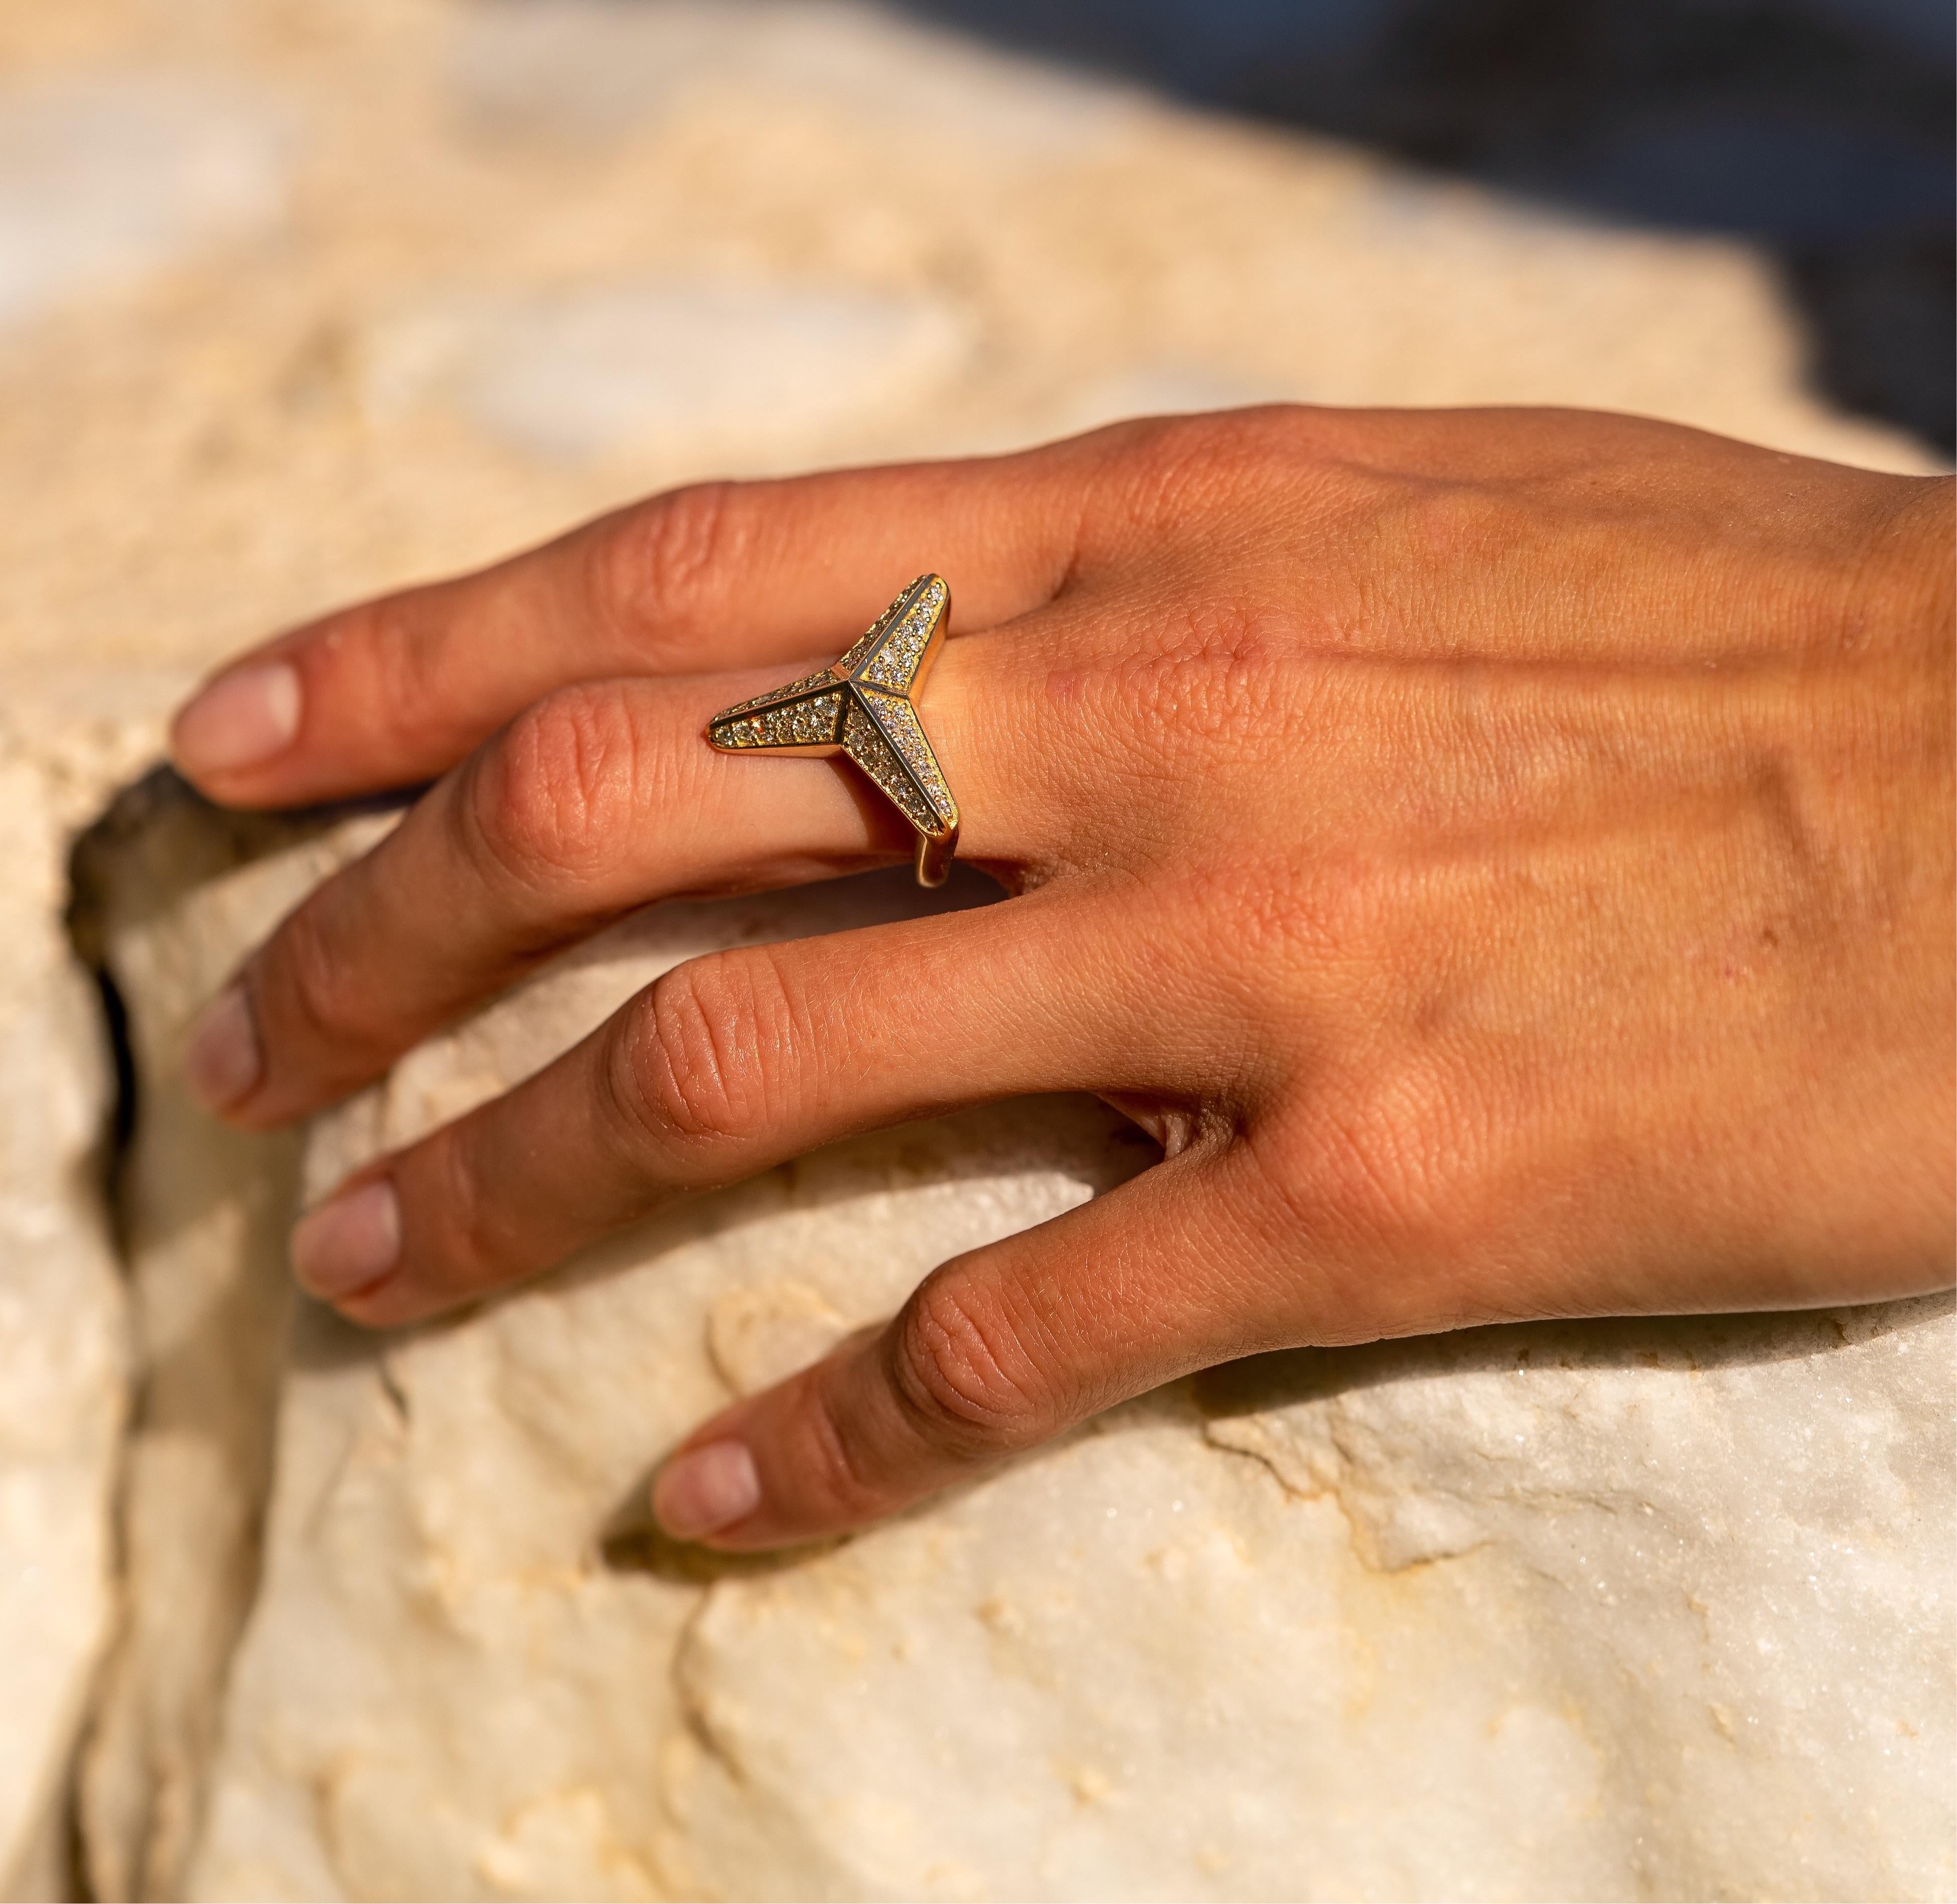 The Three pointed star, diamond ring from Maria Kotsonis' collection features a stunning design crafted in 18K yellow gold, with a hallmark from Cyprus. This statement ring comes in a highly polished finish and is adorned with natural white Diamonds